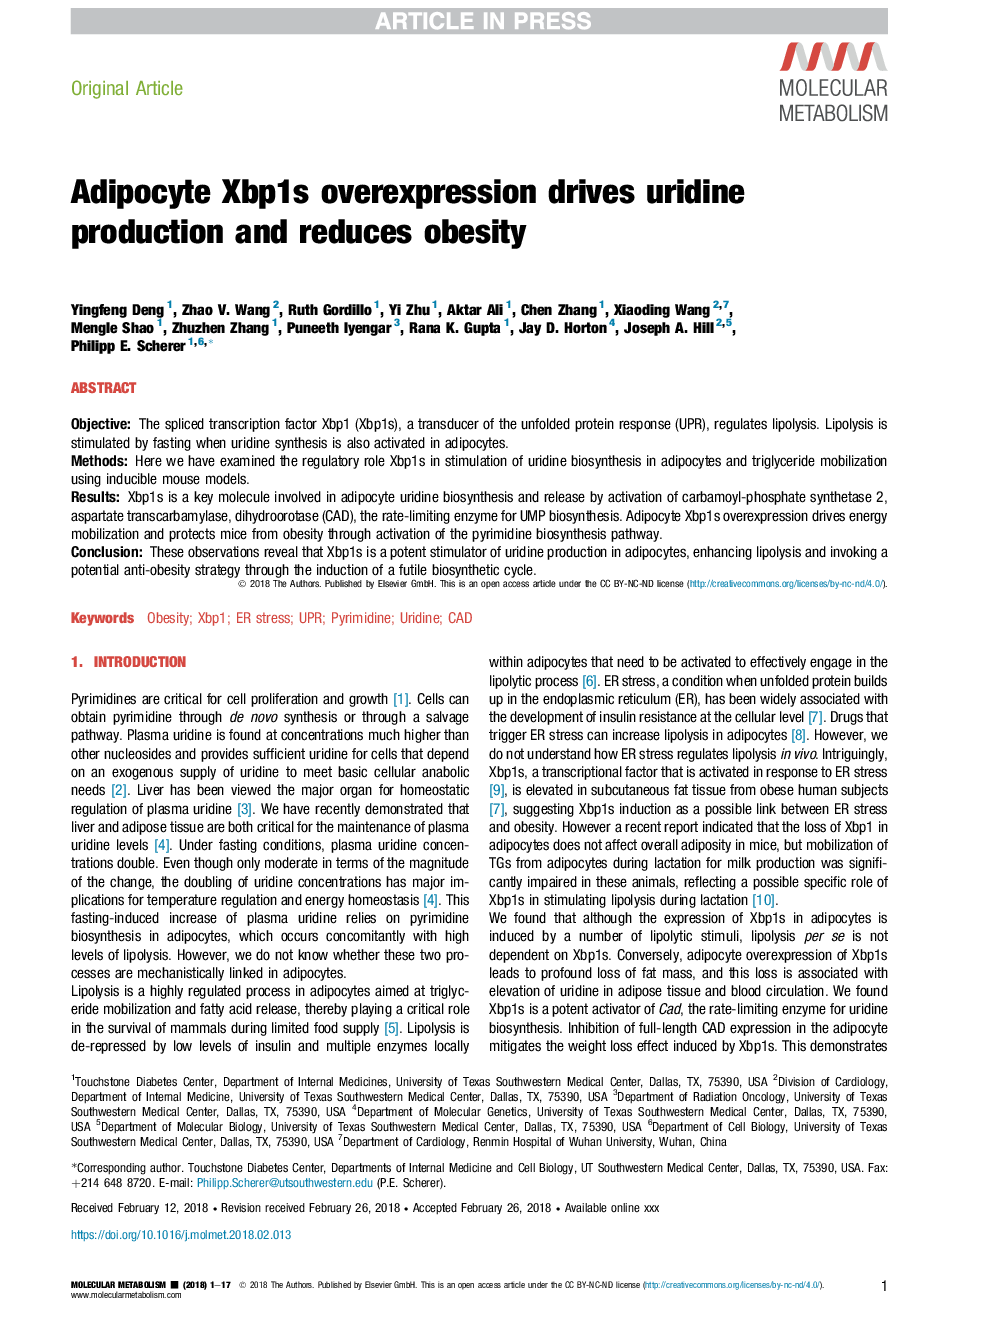 Adipocyte Xbp1s overexpression drives uridine production and reduces obesity